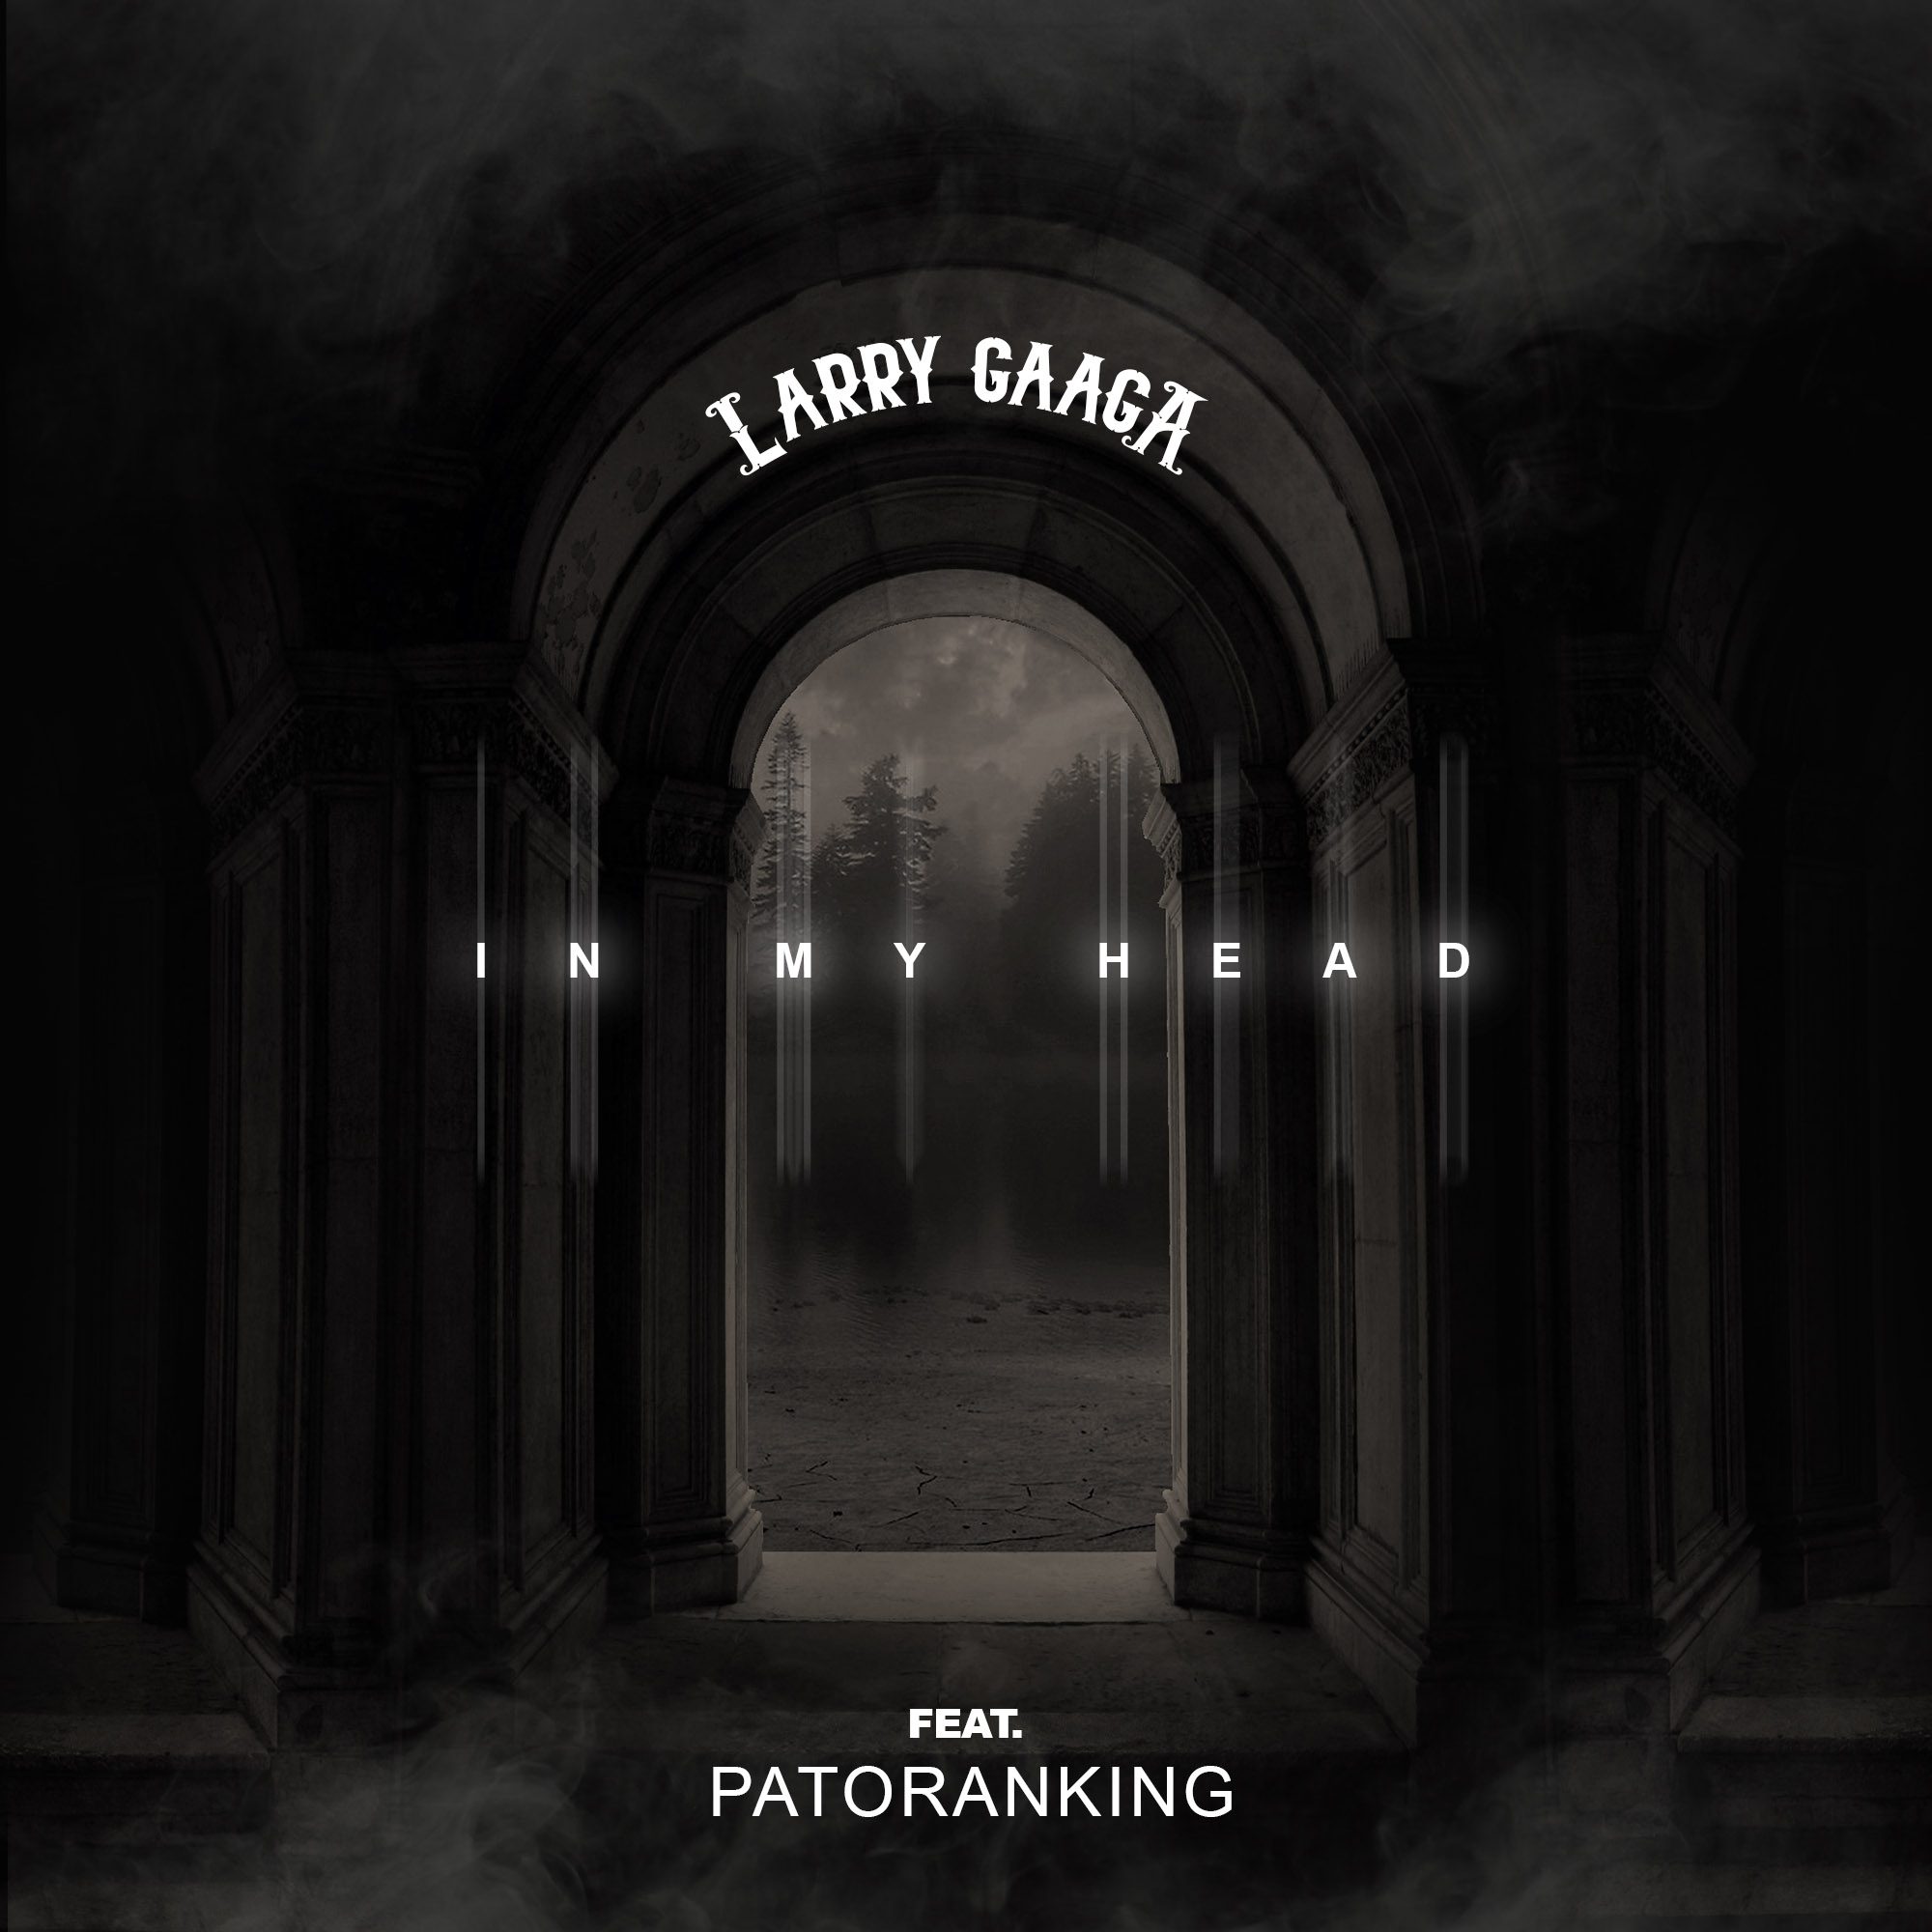 LARRY GAAGA TEAMS UP WITH PATORANKING TO CELEBRATE HIS BIRTHDAY WITH NEW SONG AND VIDEO ‘IN MY HEAD’